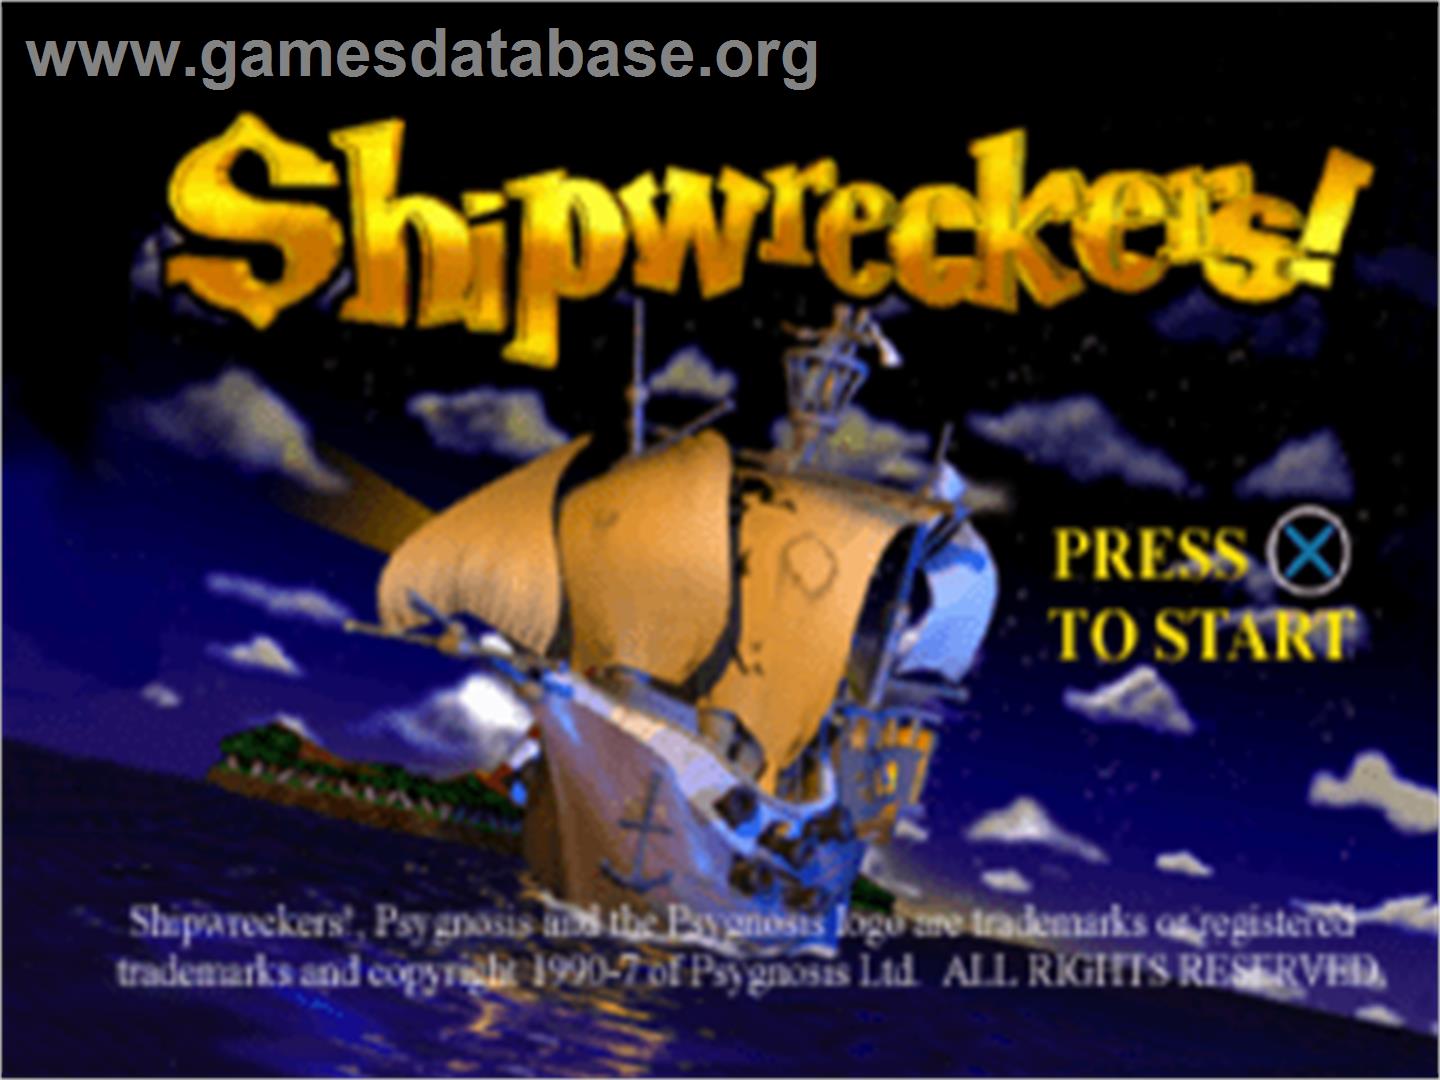 Shipwreckers! - Sony Playstation - Artwork - Title Screen